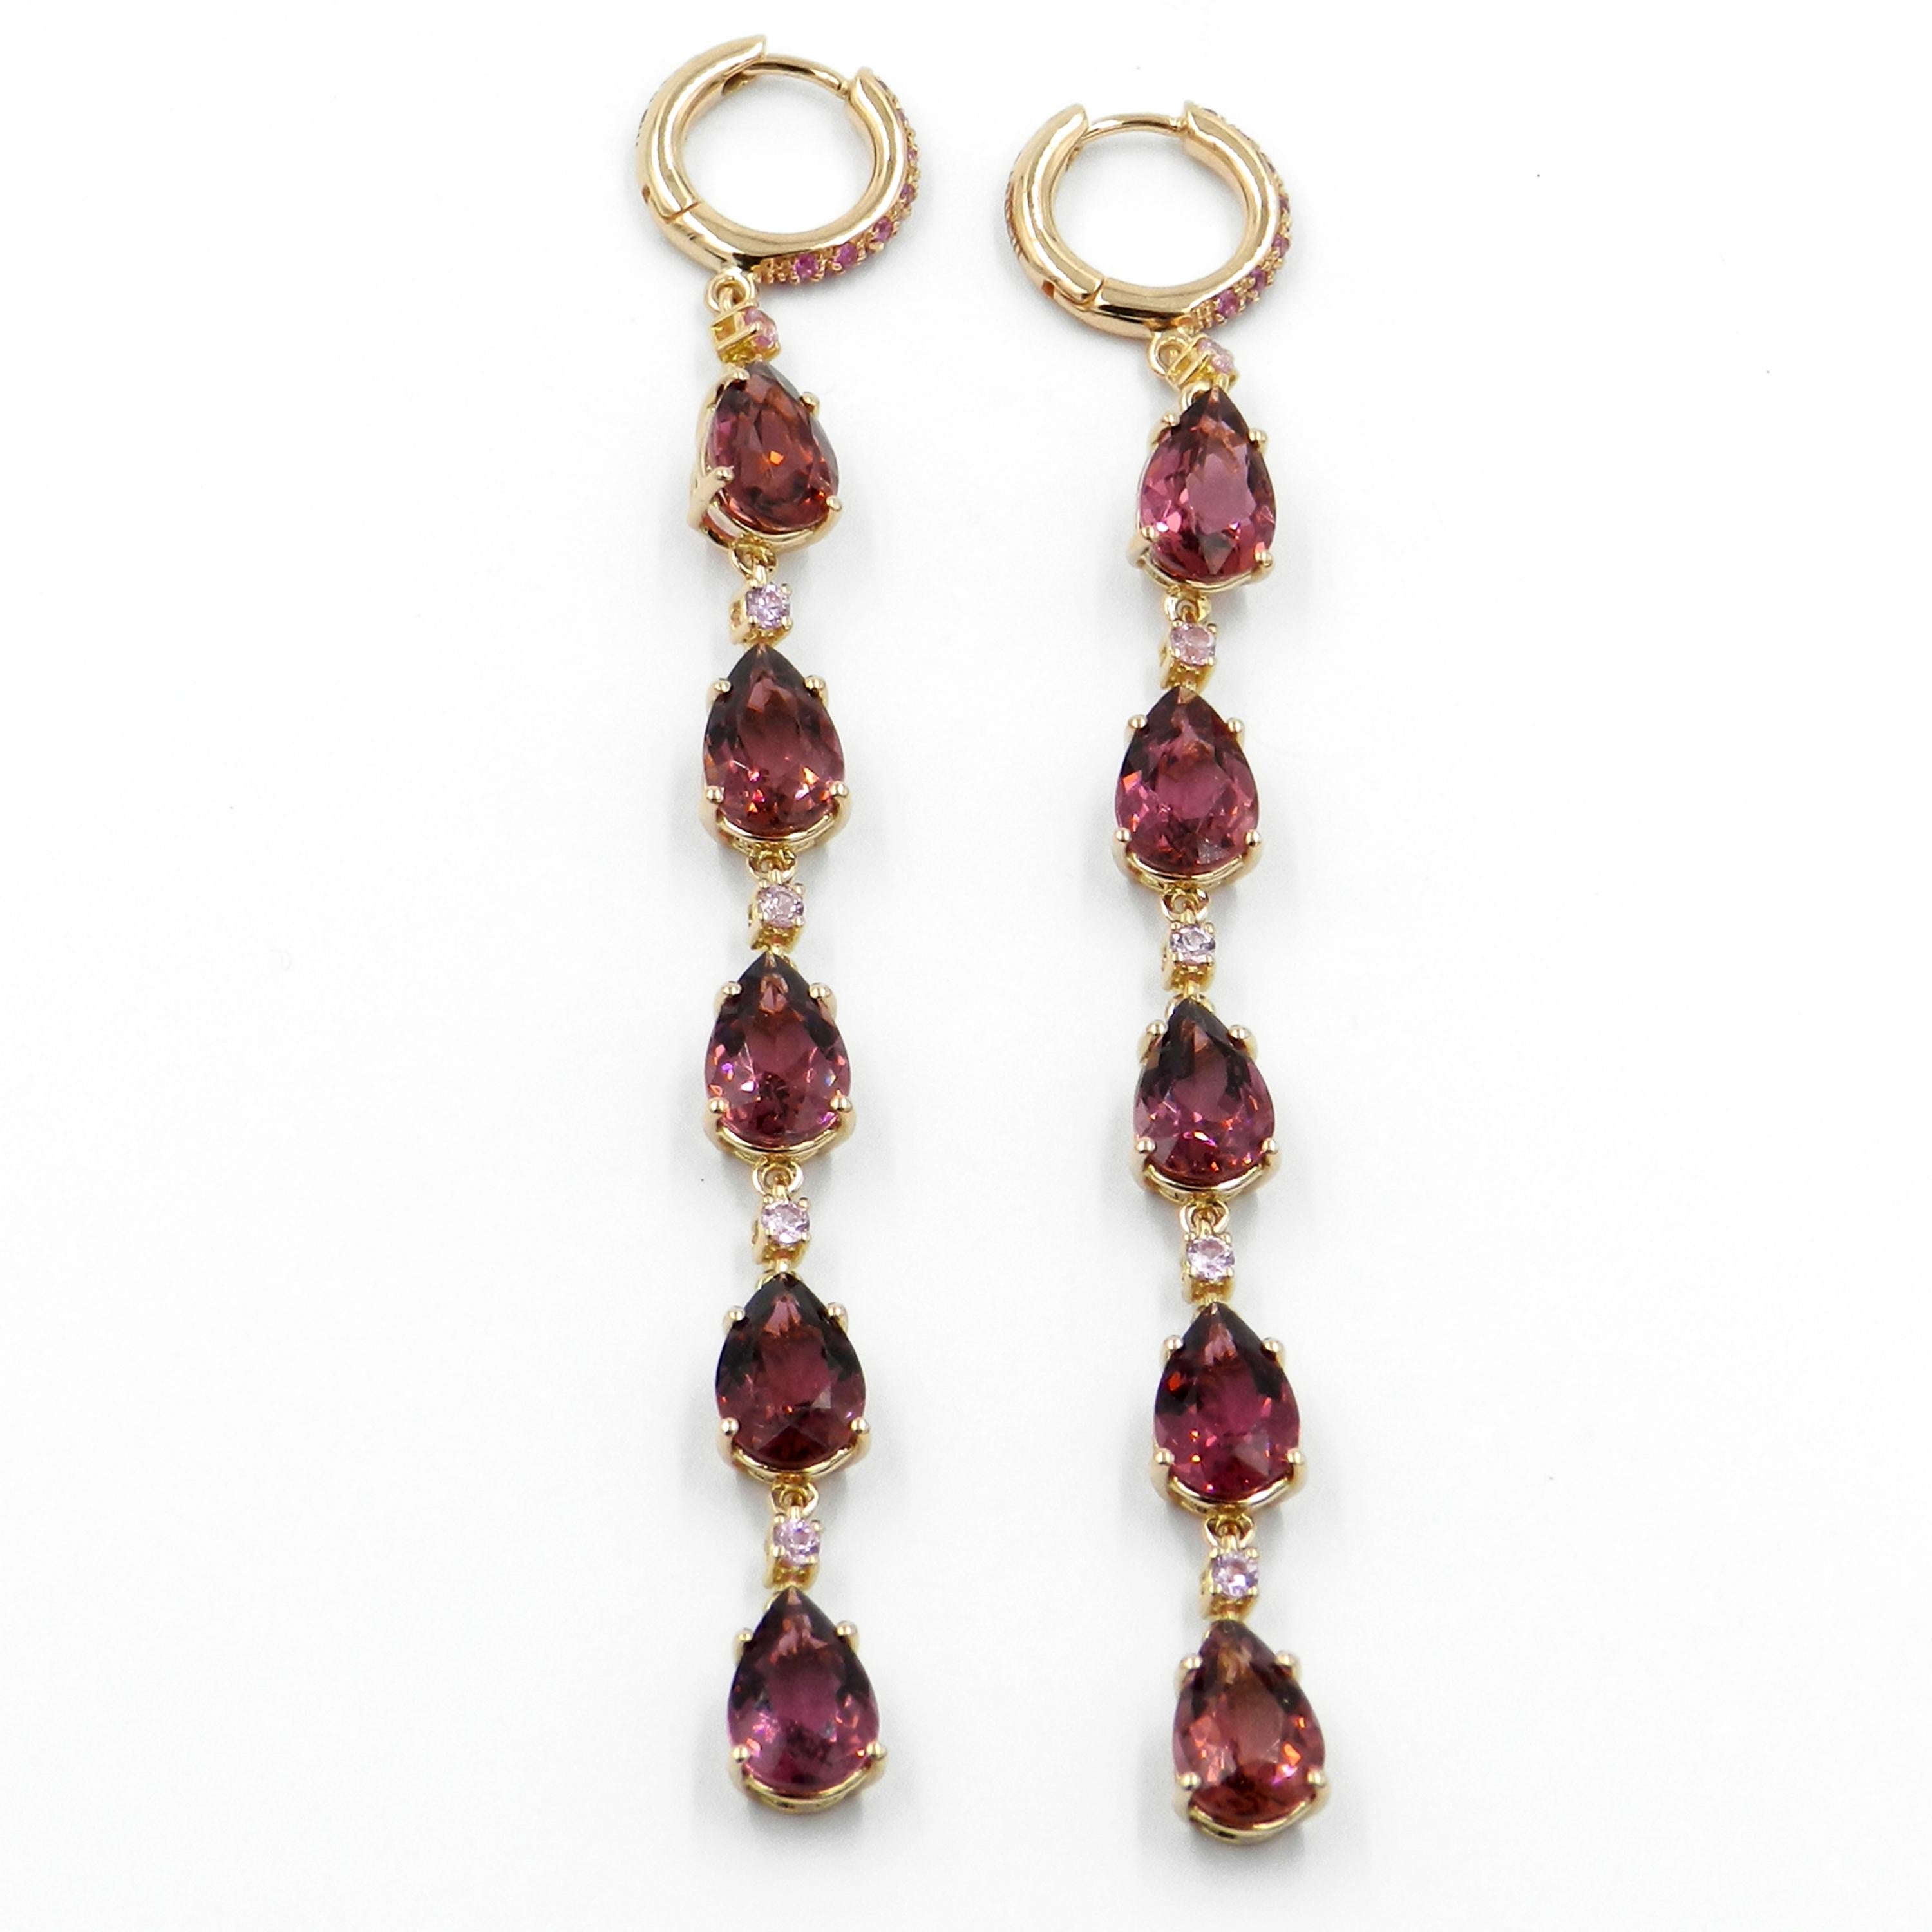 Contemporary 18 Karat Rose Gold Pink Tourmaline and Pink Sapphires Long Earrings